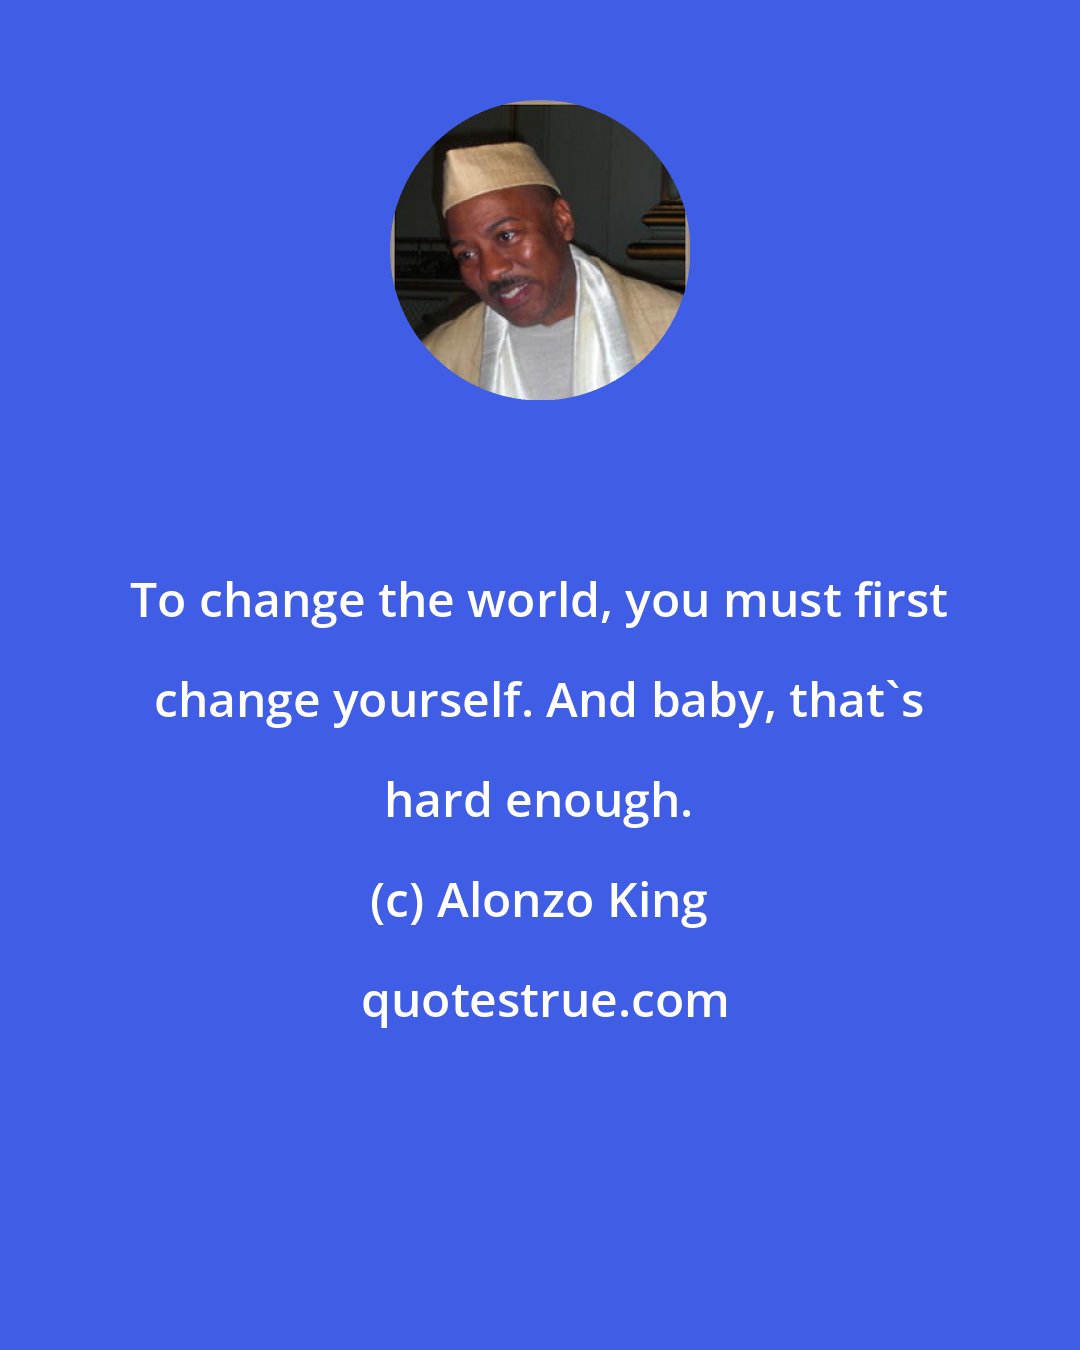 Alonzo King: To change the world, you must first change yourself. And baby, that's hard enough.